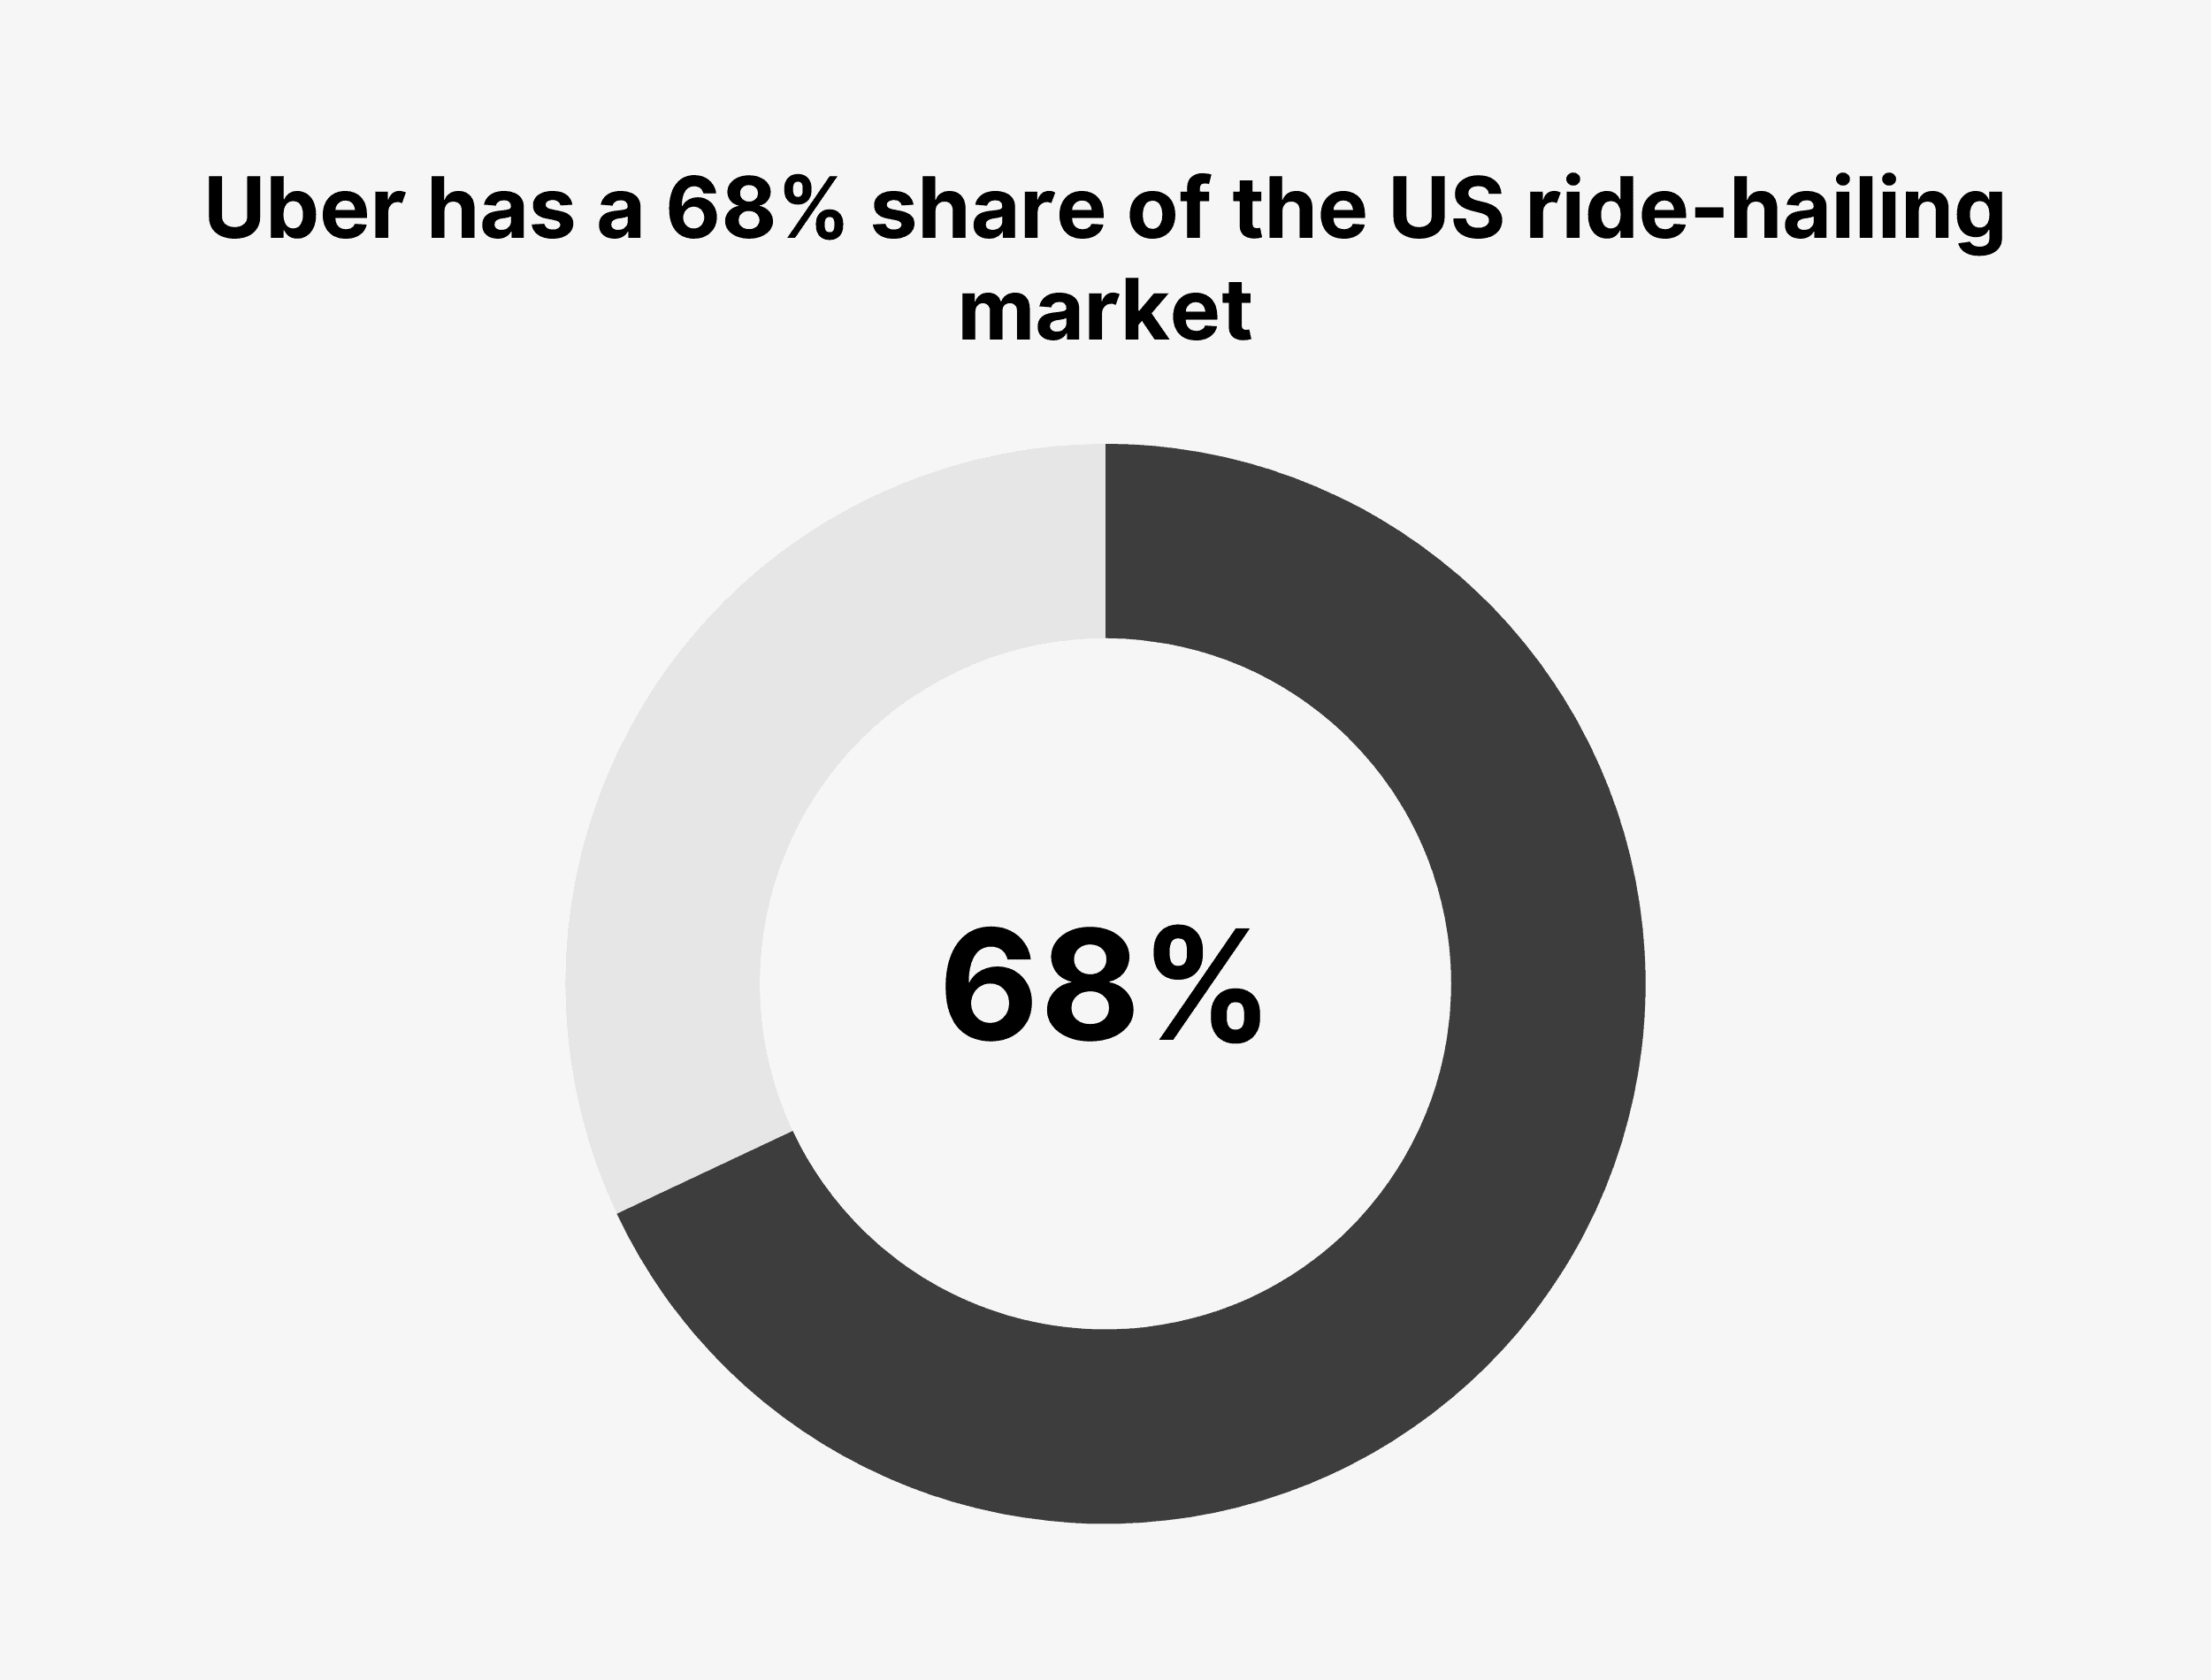 Uber has a 68% share of the US ride-hailing market